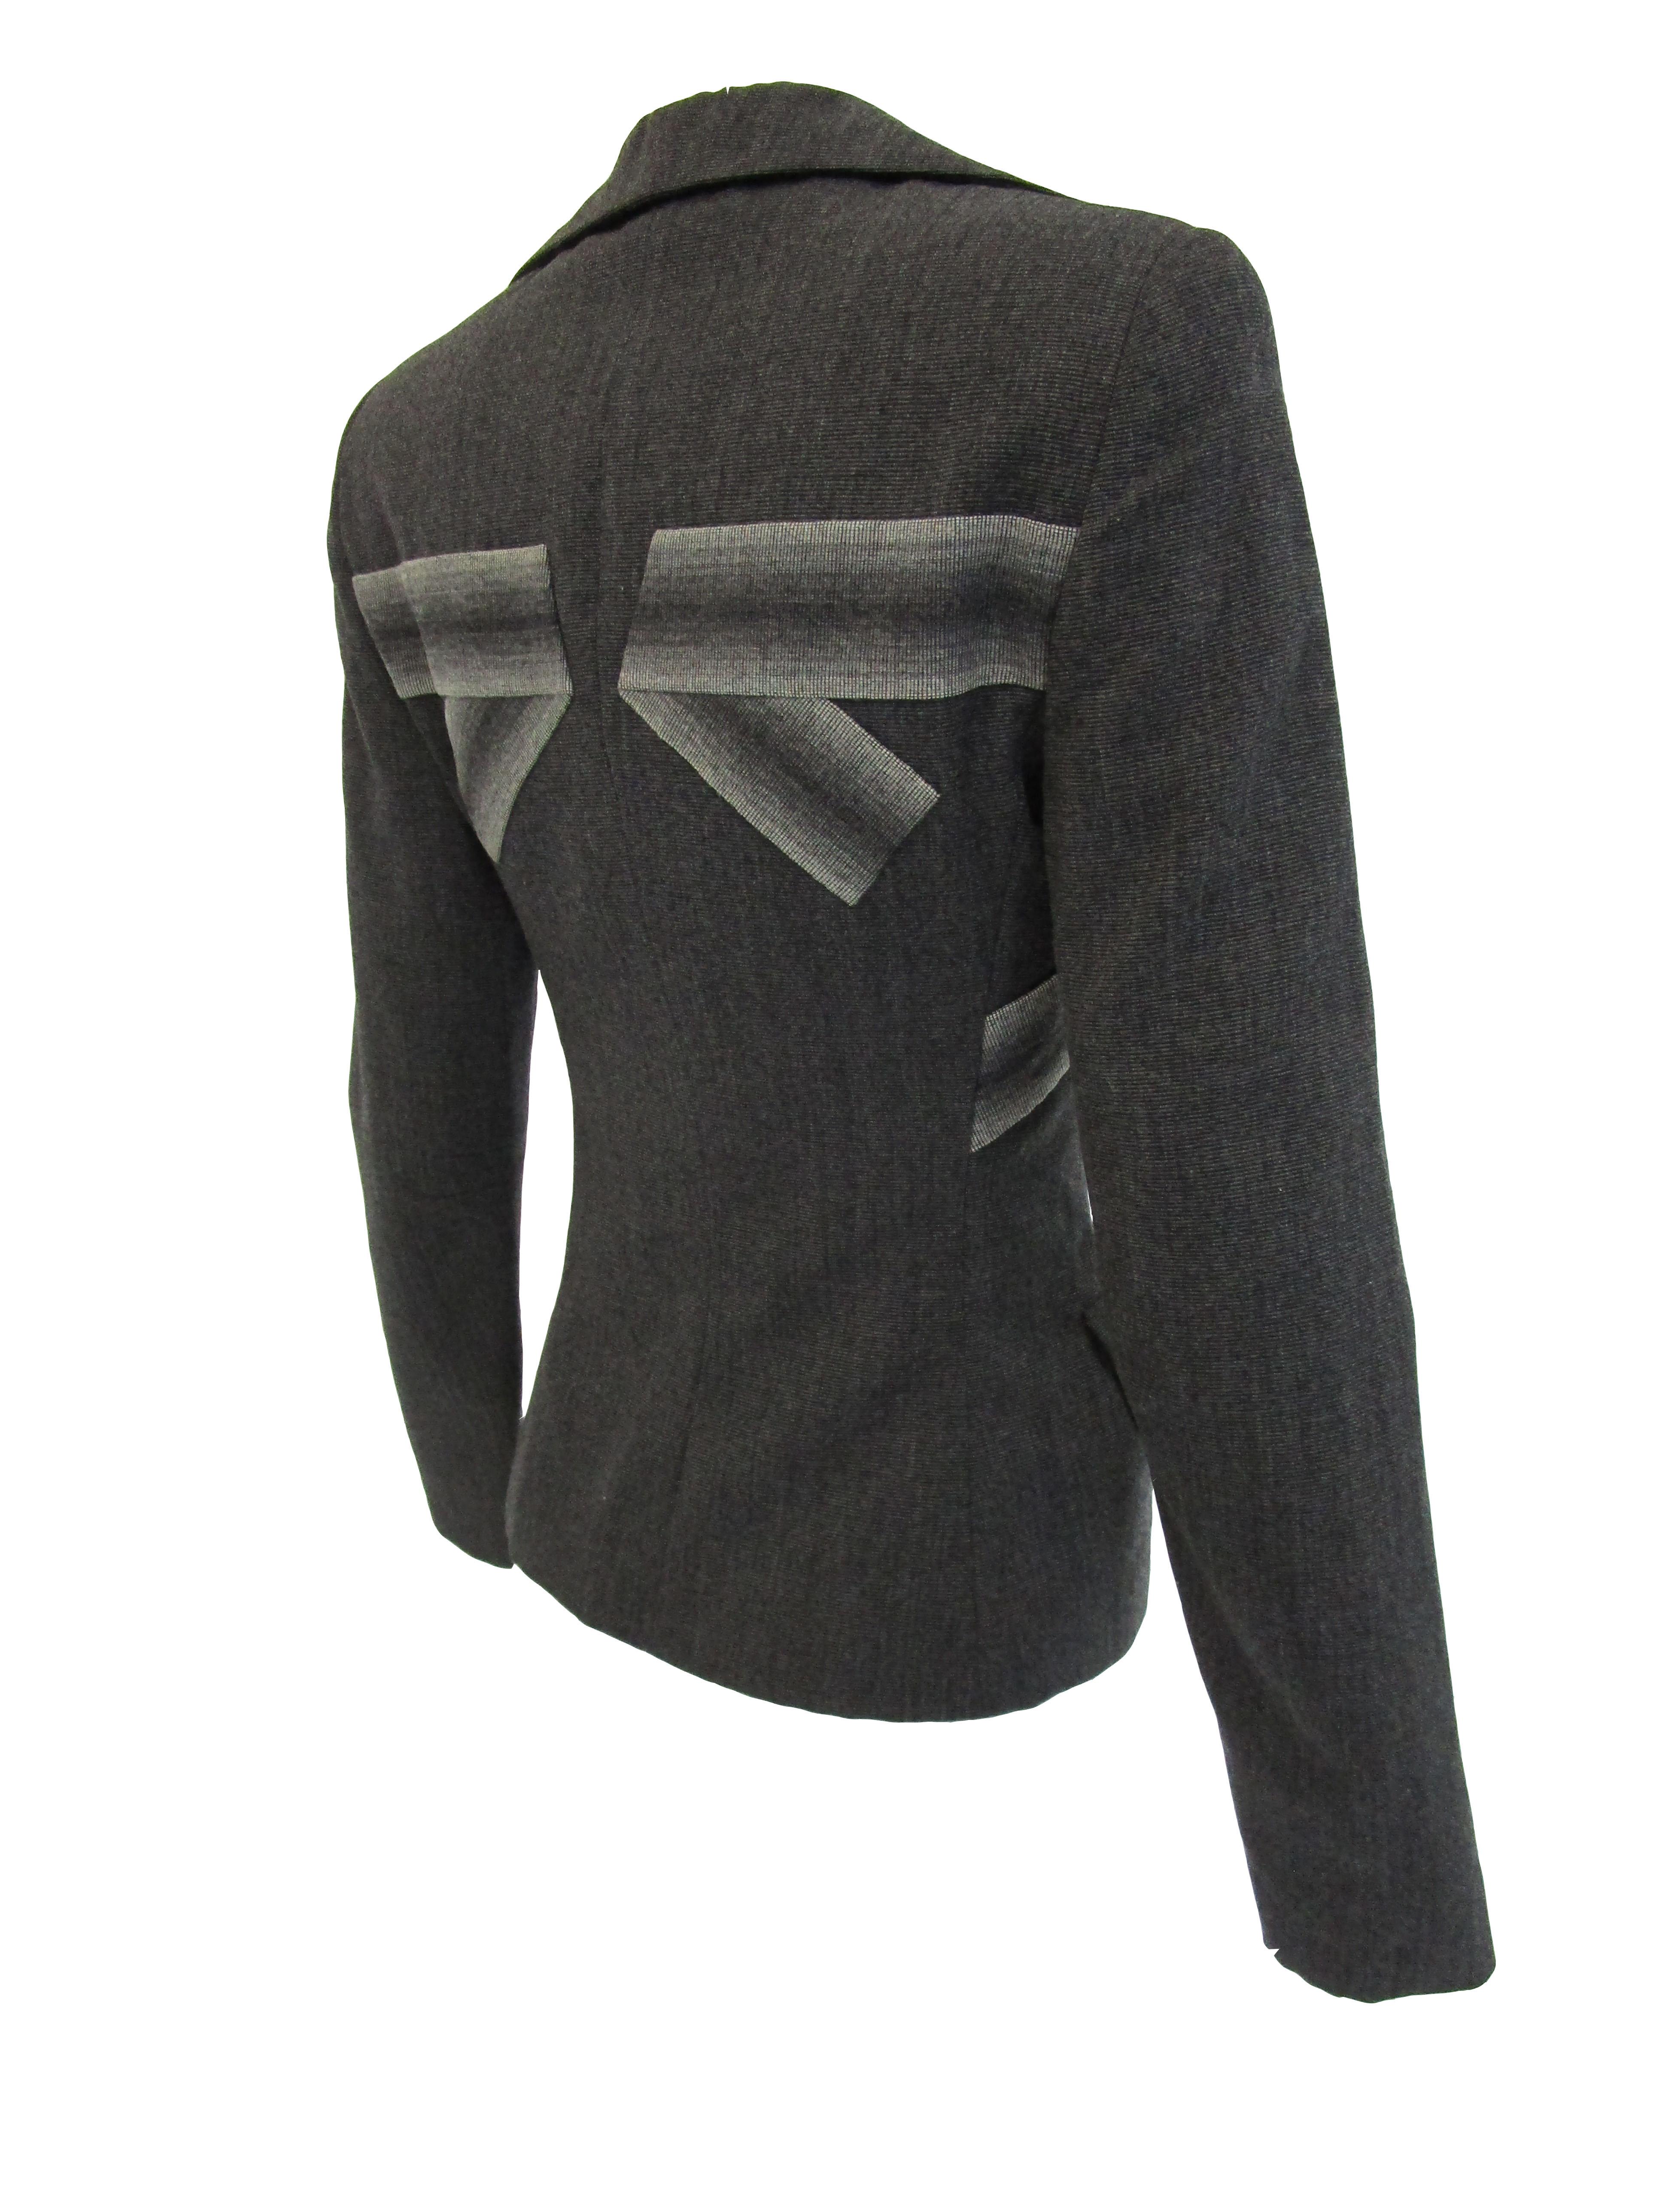 1940s Gilbert Adrian Ash Grey Wool Suit Jacket with Gradient Stripes In Excellent Condition For Sale In Houston, TX